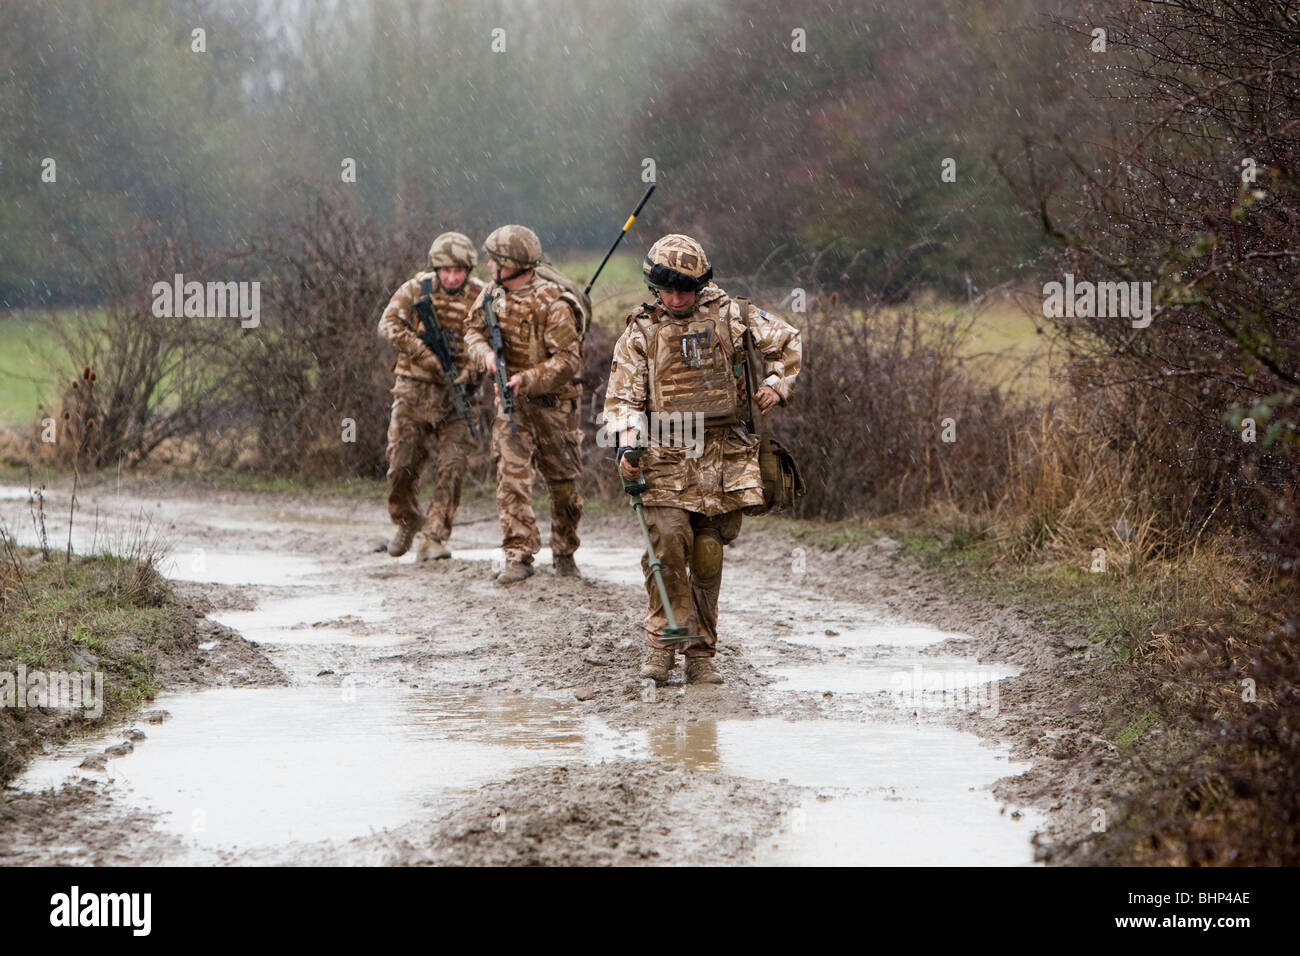 Three British soldier walking in line along a muddy road behind a metal detector looking for an IED roadside bomb Stock Photo